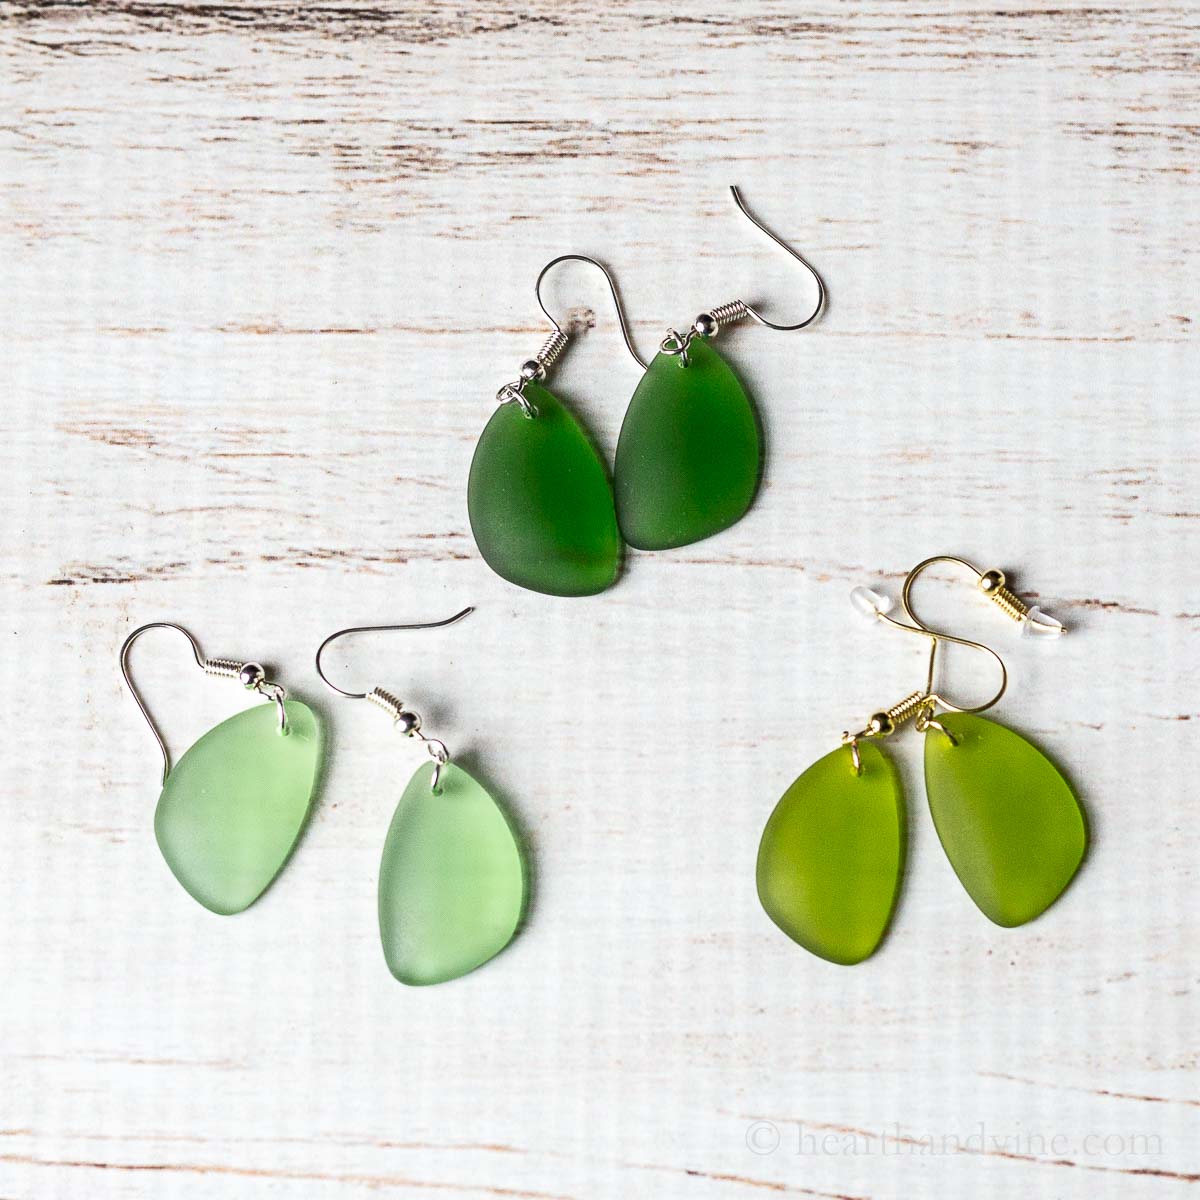 Three pairs of sea glass earrings in shade of green.